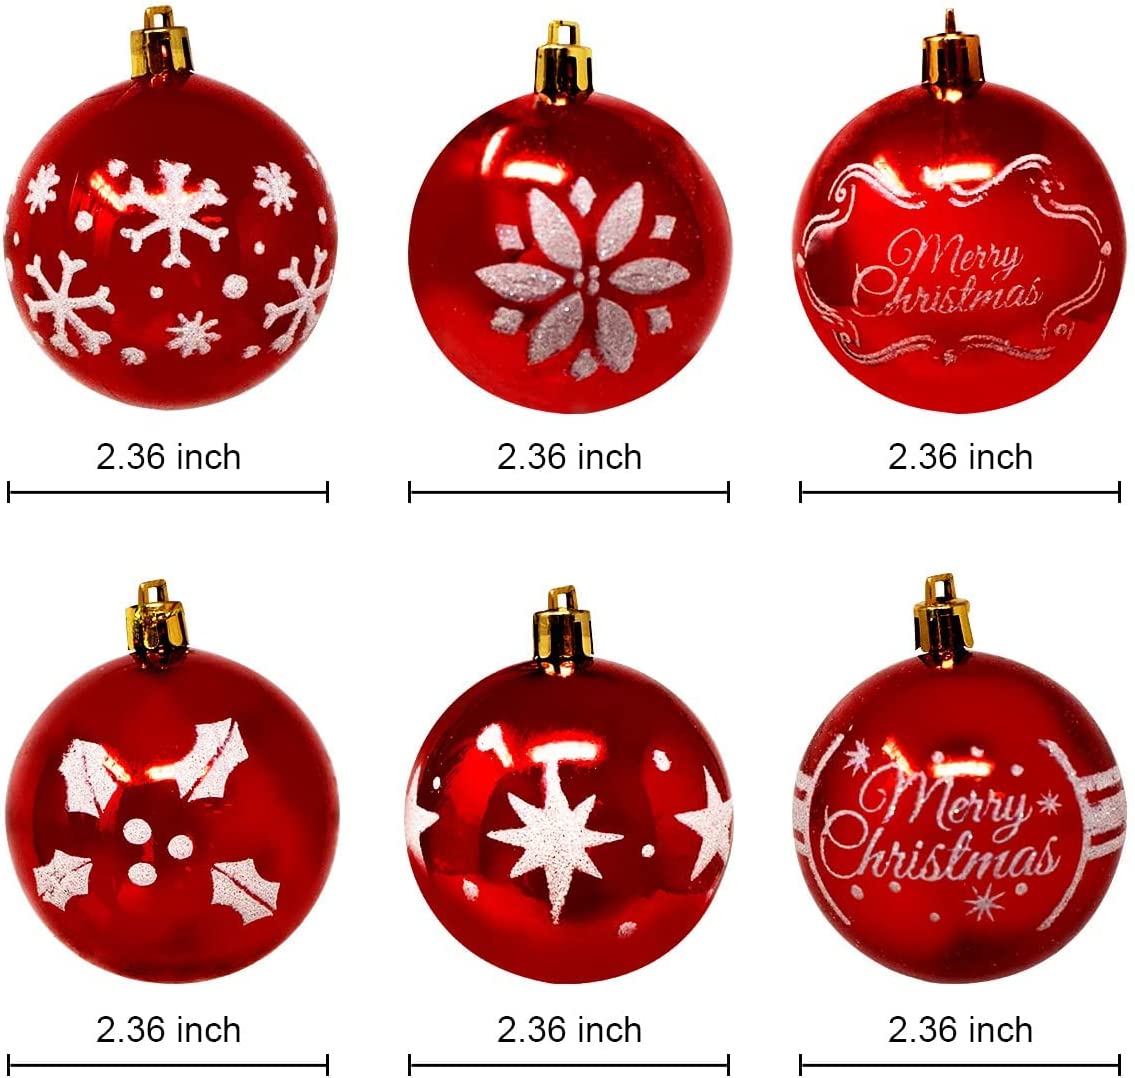 60mm/2.36in Red Christmas Ball Ornament with Glittering Painting 24ct